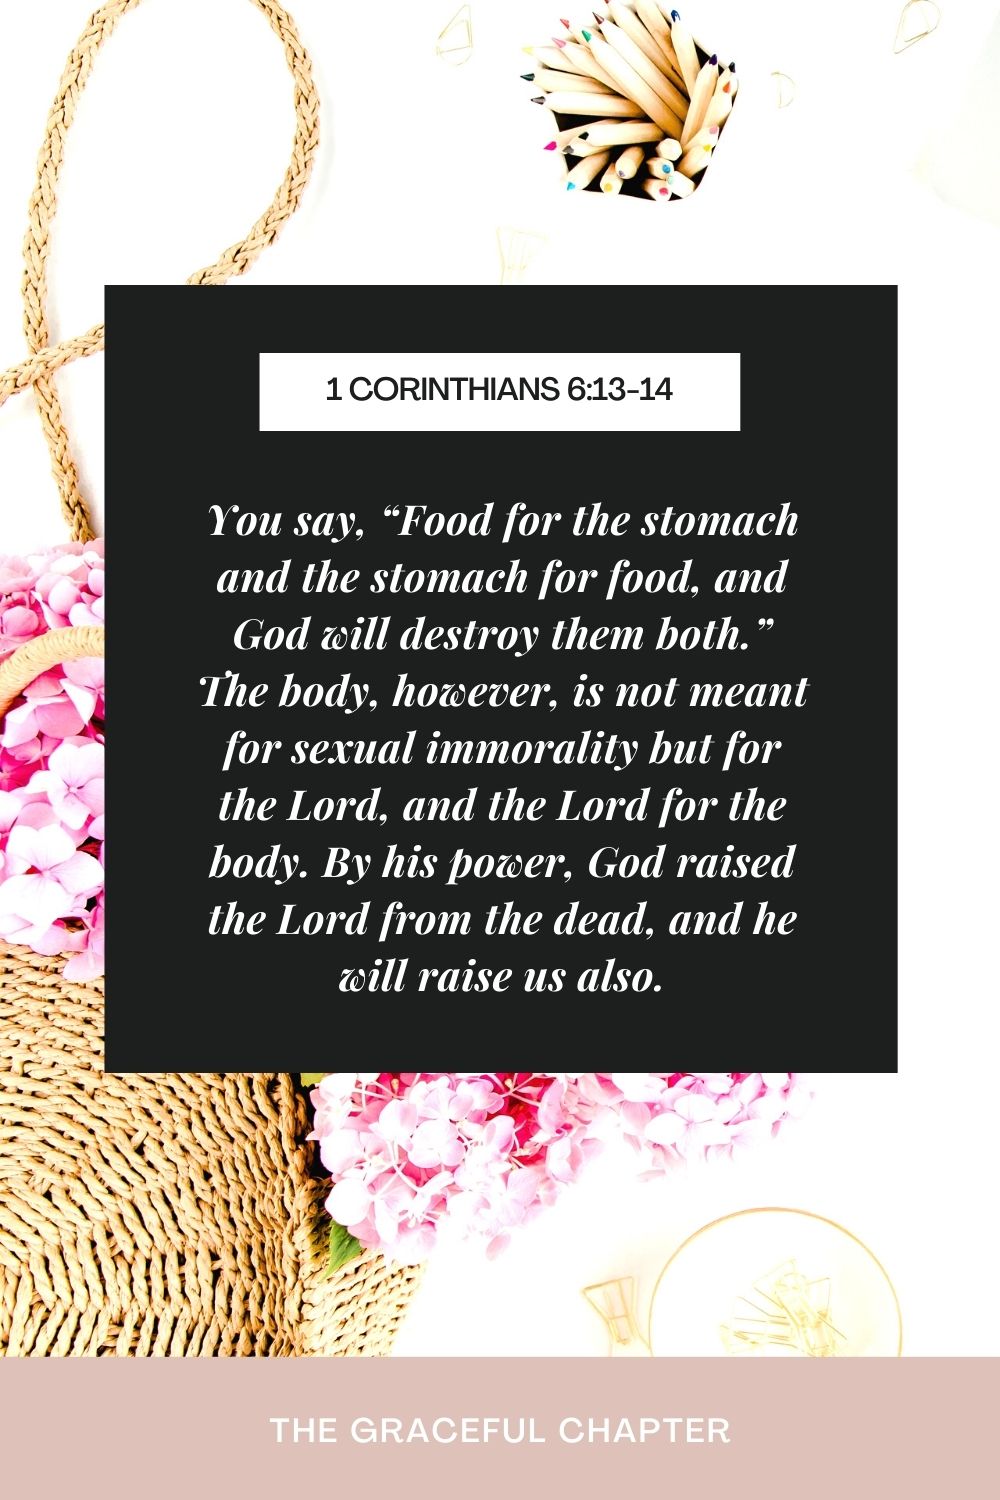 You say, “Food for the stomach and the stomach for food, and God will destroy them both.” The body, however, is not meant for sexual immorality but for the Lord, and the Lord for the body. By his power, God raised the Lord from the dead, and he will raise us also. 1 Corinthians 6:13-14